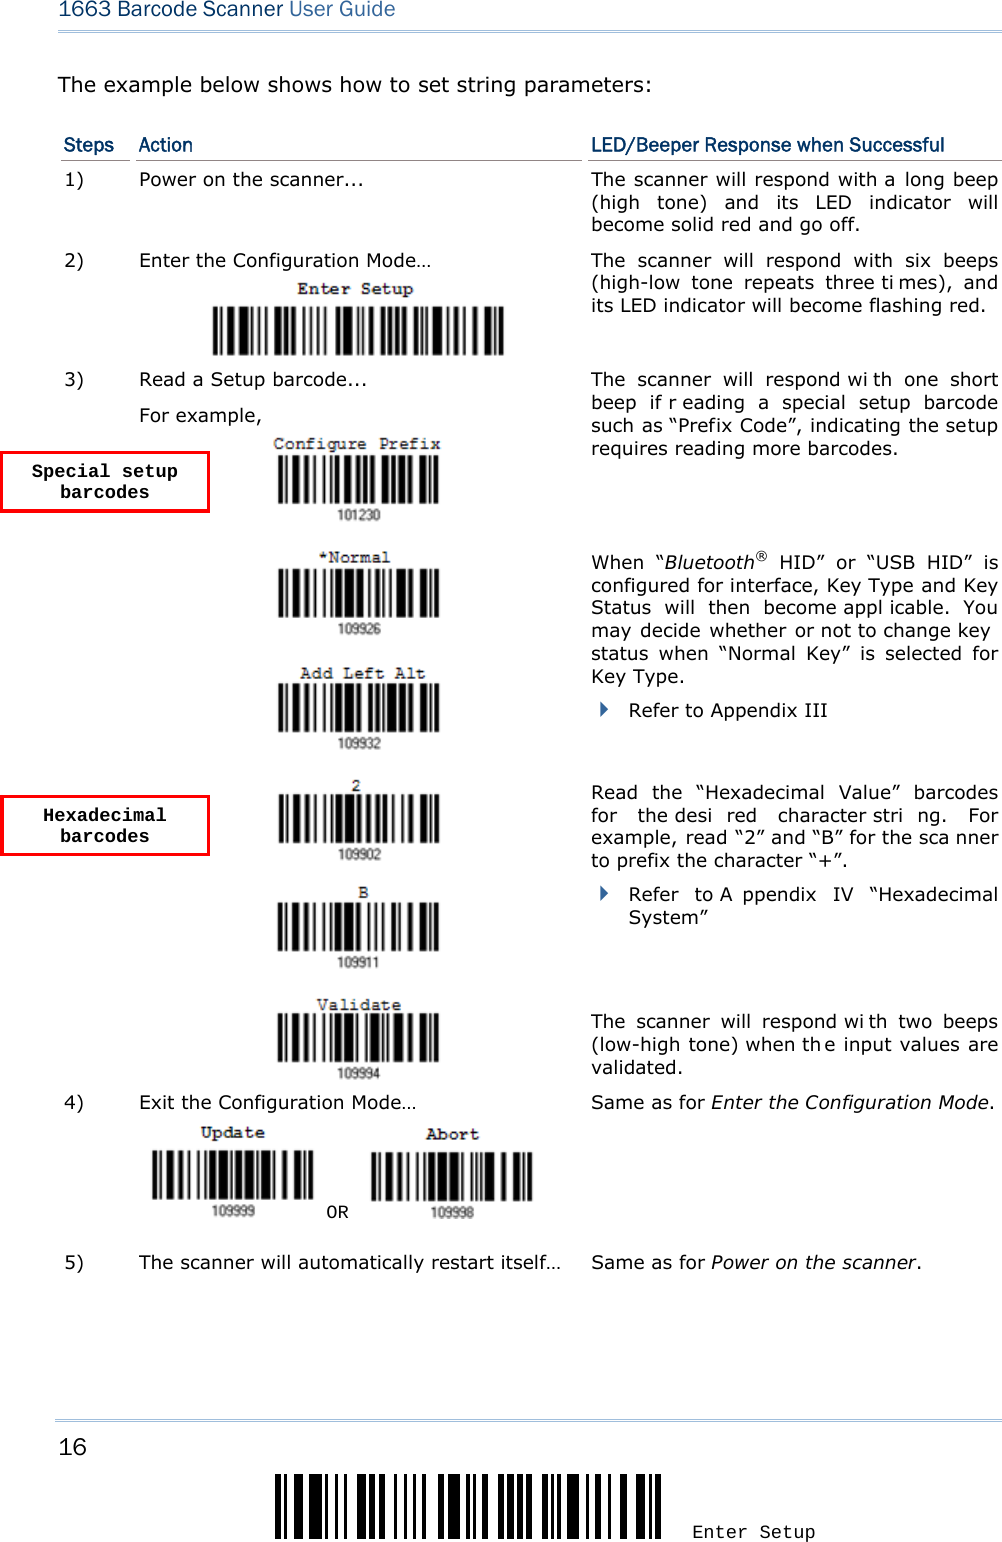 16 Enter Setup 1663 Barcode Scanner User Guide  The example below shows how to set string parameters: Steps  Action  LED/Beeper Response when Successful 1)  Power on the scanner...  The scanner will respond with a long beep (high tone) and its LED indicator will become solid red and go off. 2)  Enter the Configuration Mode…  The scanner will respond with six beeps (high-low tone repeats three ti mes), and its LED indicator will become flashing red.  Read a Setup barcode... For example,   The scanner will respond wi th one short beep if r eading a special setup barcode such as “Prefix Code”, indicating the setup requires reading more barcodes.        When “Bluetooth® HID” or “USB HID” is configured for interface, Key Type and Key Status will then become appl icable. You may decide whether or not to change key status when “Normal Key” is selected for Key Type.  Refer to Appendix III 3)      Read the “Hexadecimal Value” barcodes for the desi red character stri ng. For example, read “2” and “B” for the sca nner to prefix the character “+”.  Refer to A ppendix IV “Hexadecimal System”   The scanner will respond wi th two beeps (low-high tone) when th e input values are validated. 4)  Exit the Configuration Mode…   OR     Same as for Enter the Configuration Mode. 5)  The scanner will automatically restart itself…  Same as for Power on the scanner.   Special setup barcodes Hexadecimal barcodes 